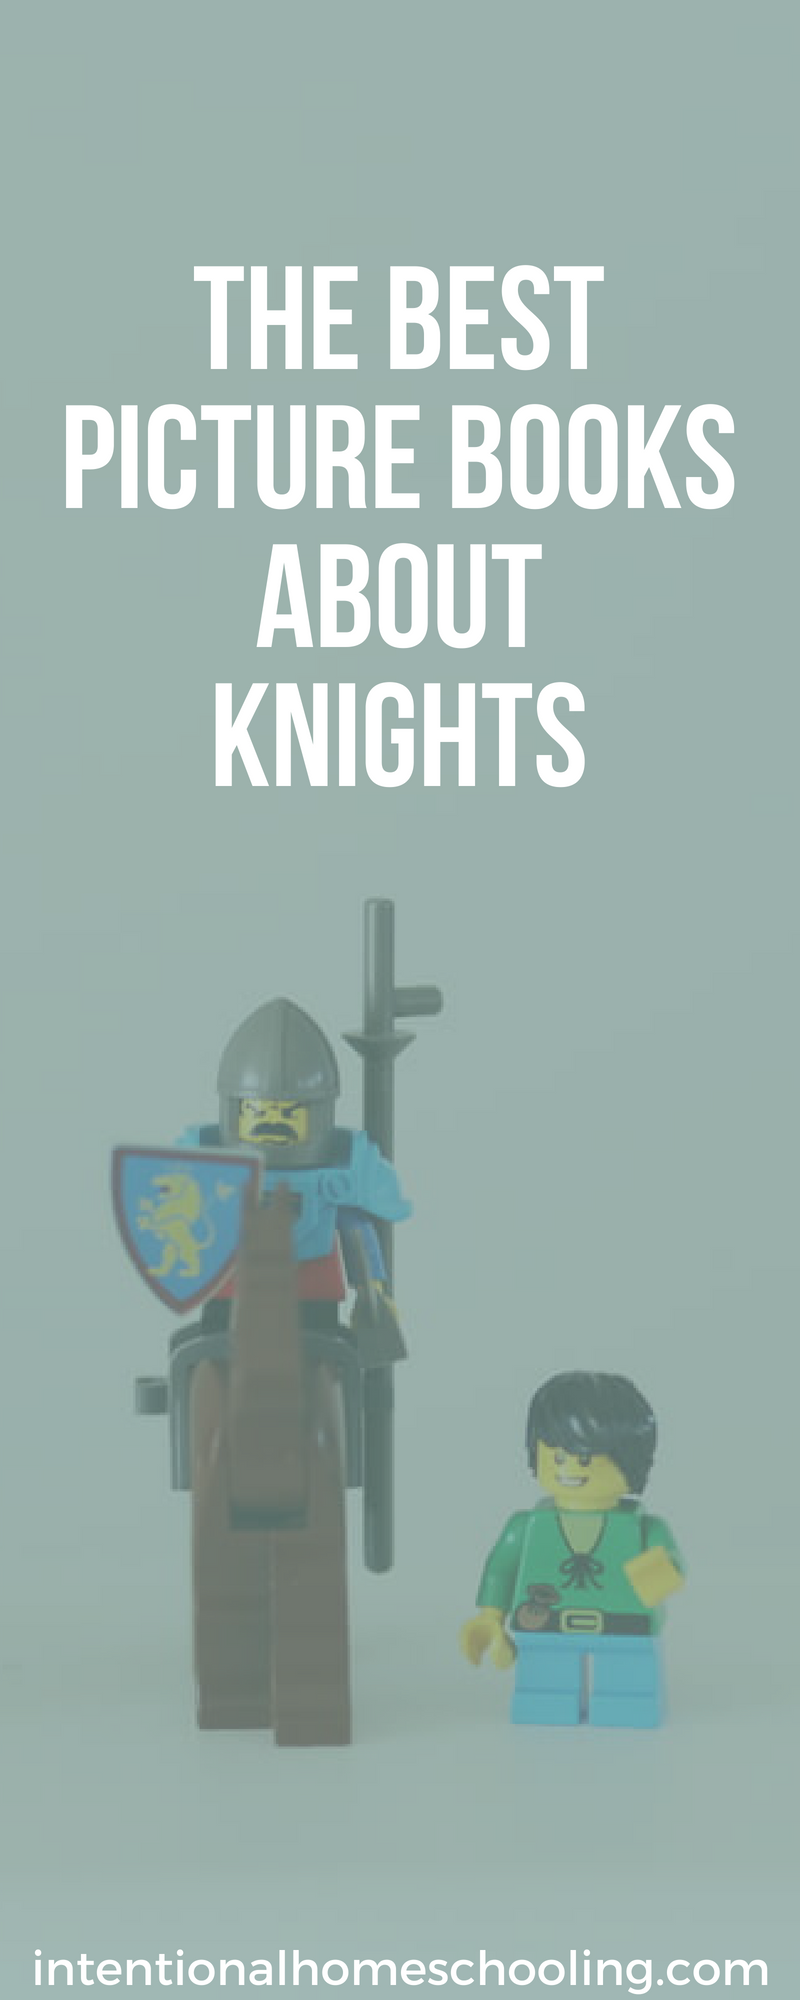 The Best Picture Books About Knights